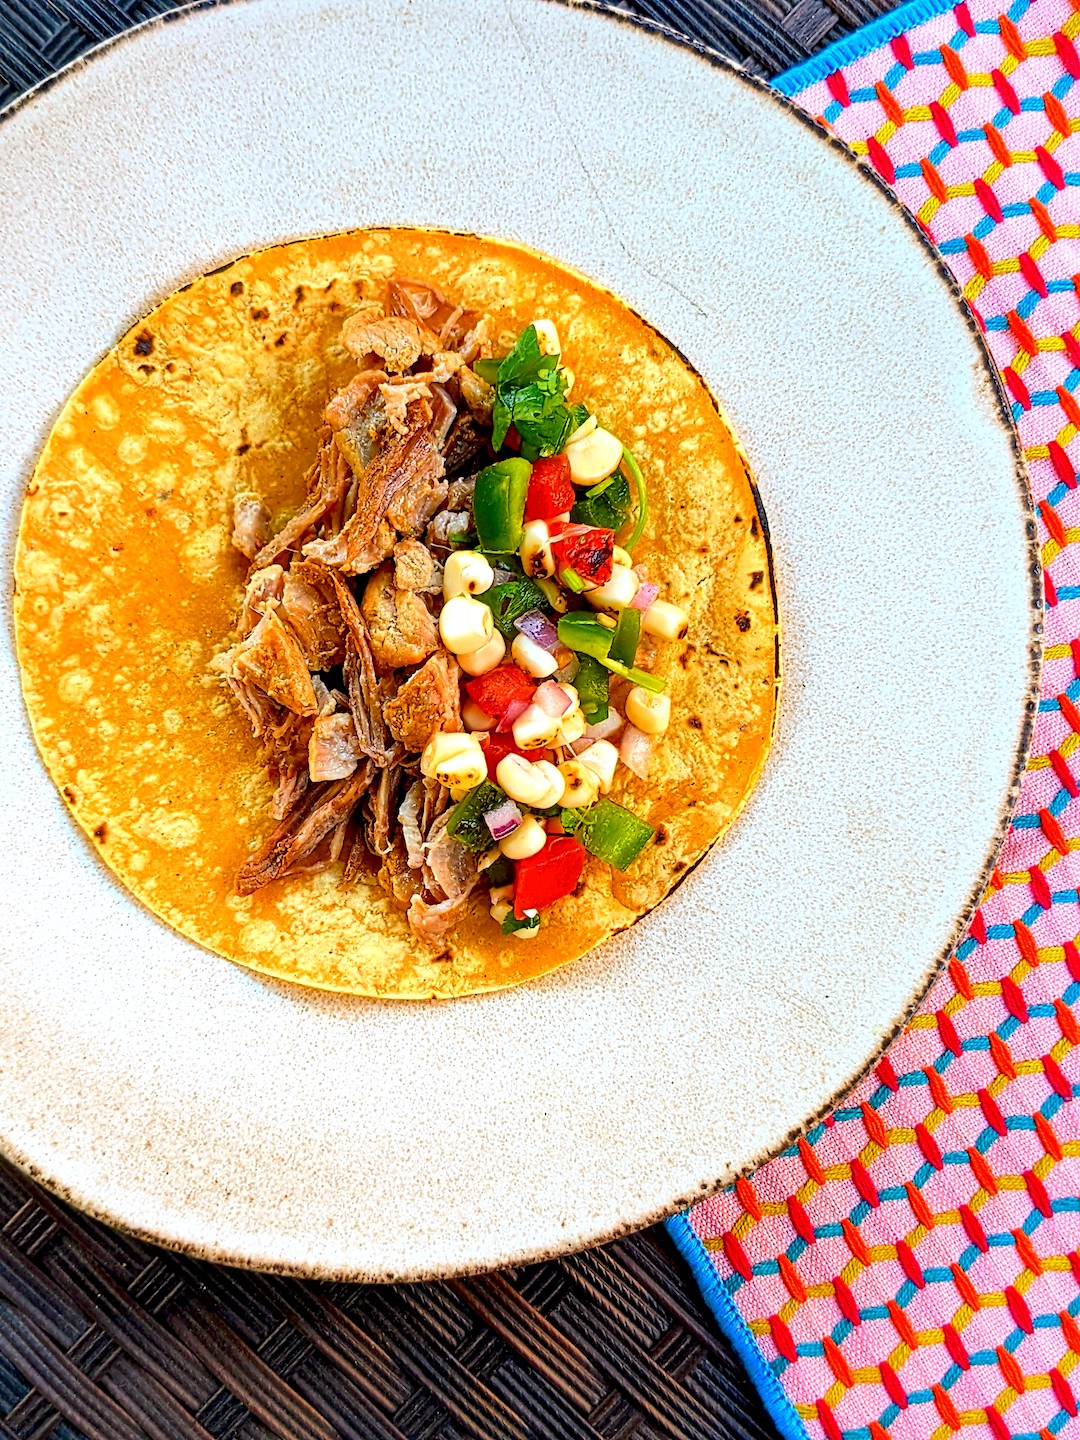 finished plate with pork carnitas on a tortilla with pico de gallo